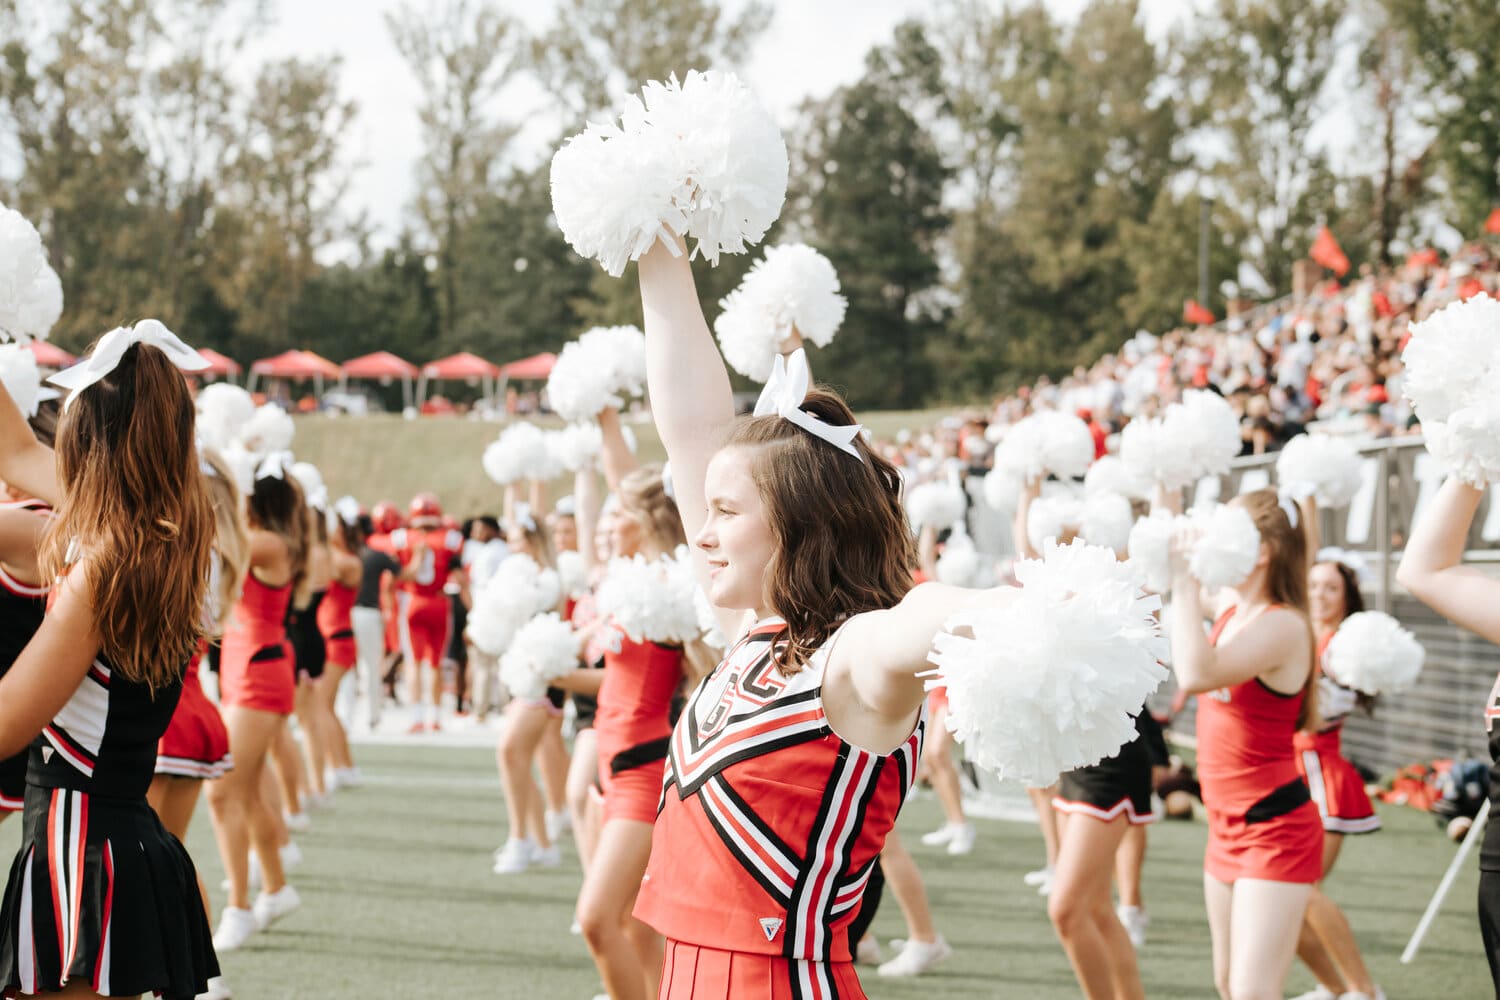 North Greenville’s cheerleaders cheered for our Crusaders on the sidelines for the first homecoming game in two years this past Saturday.